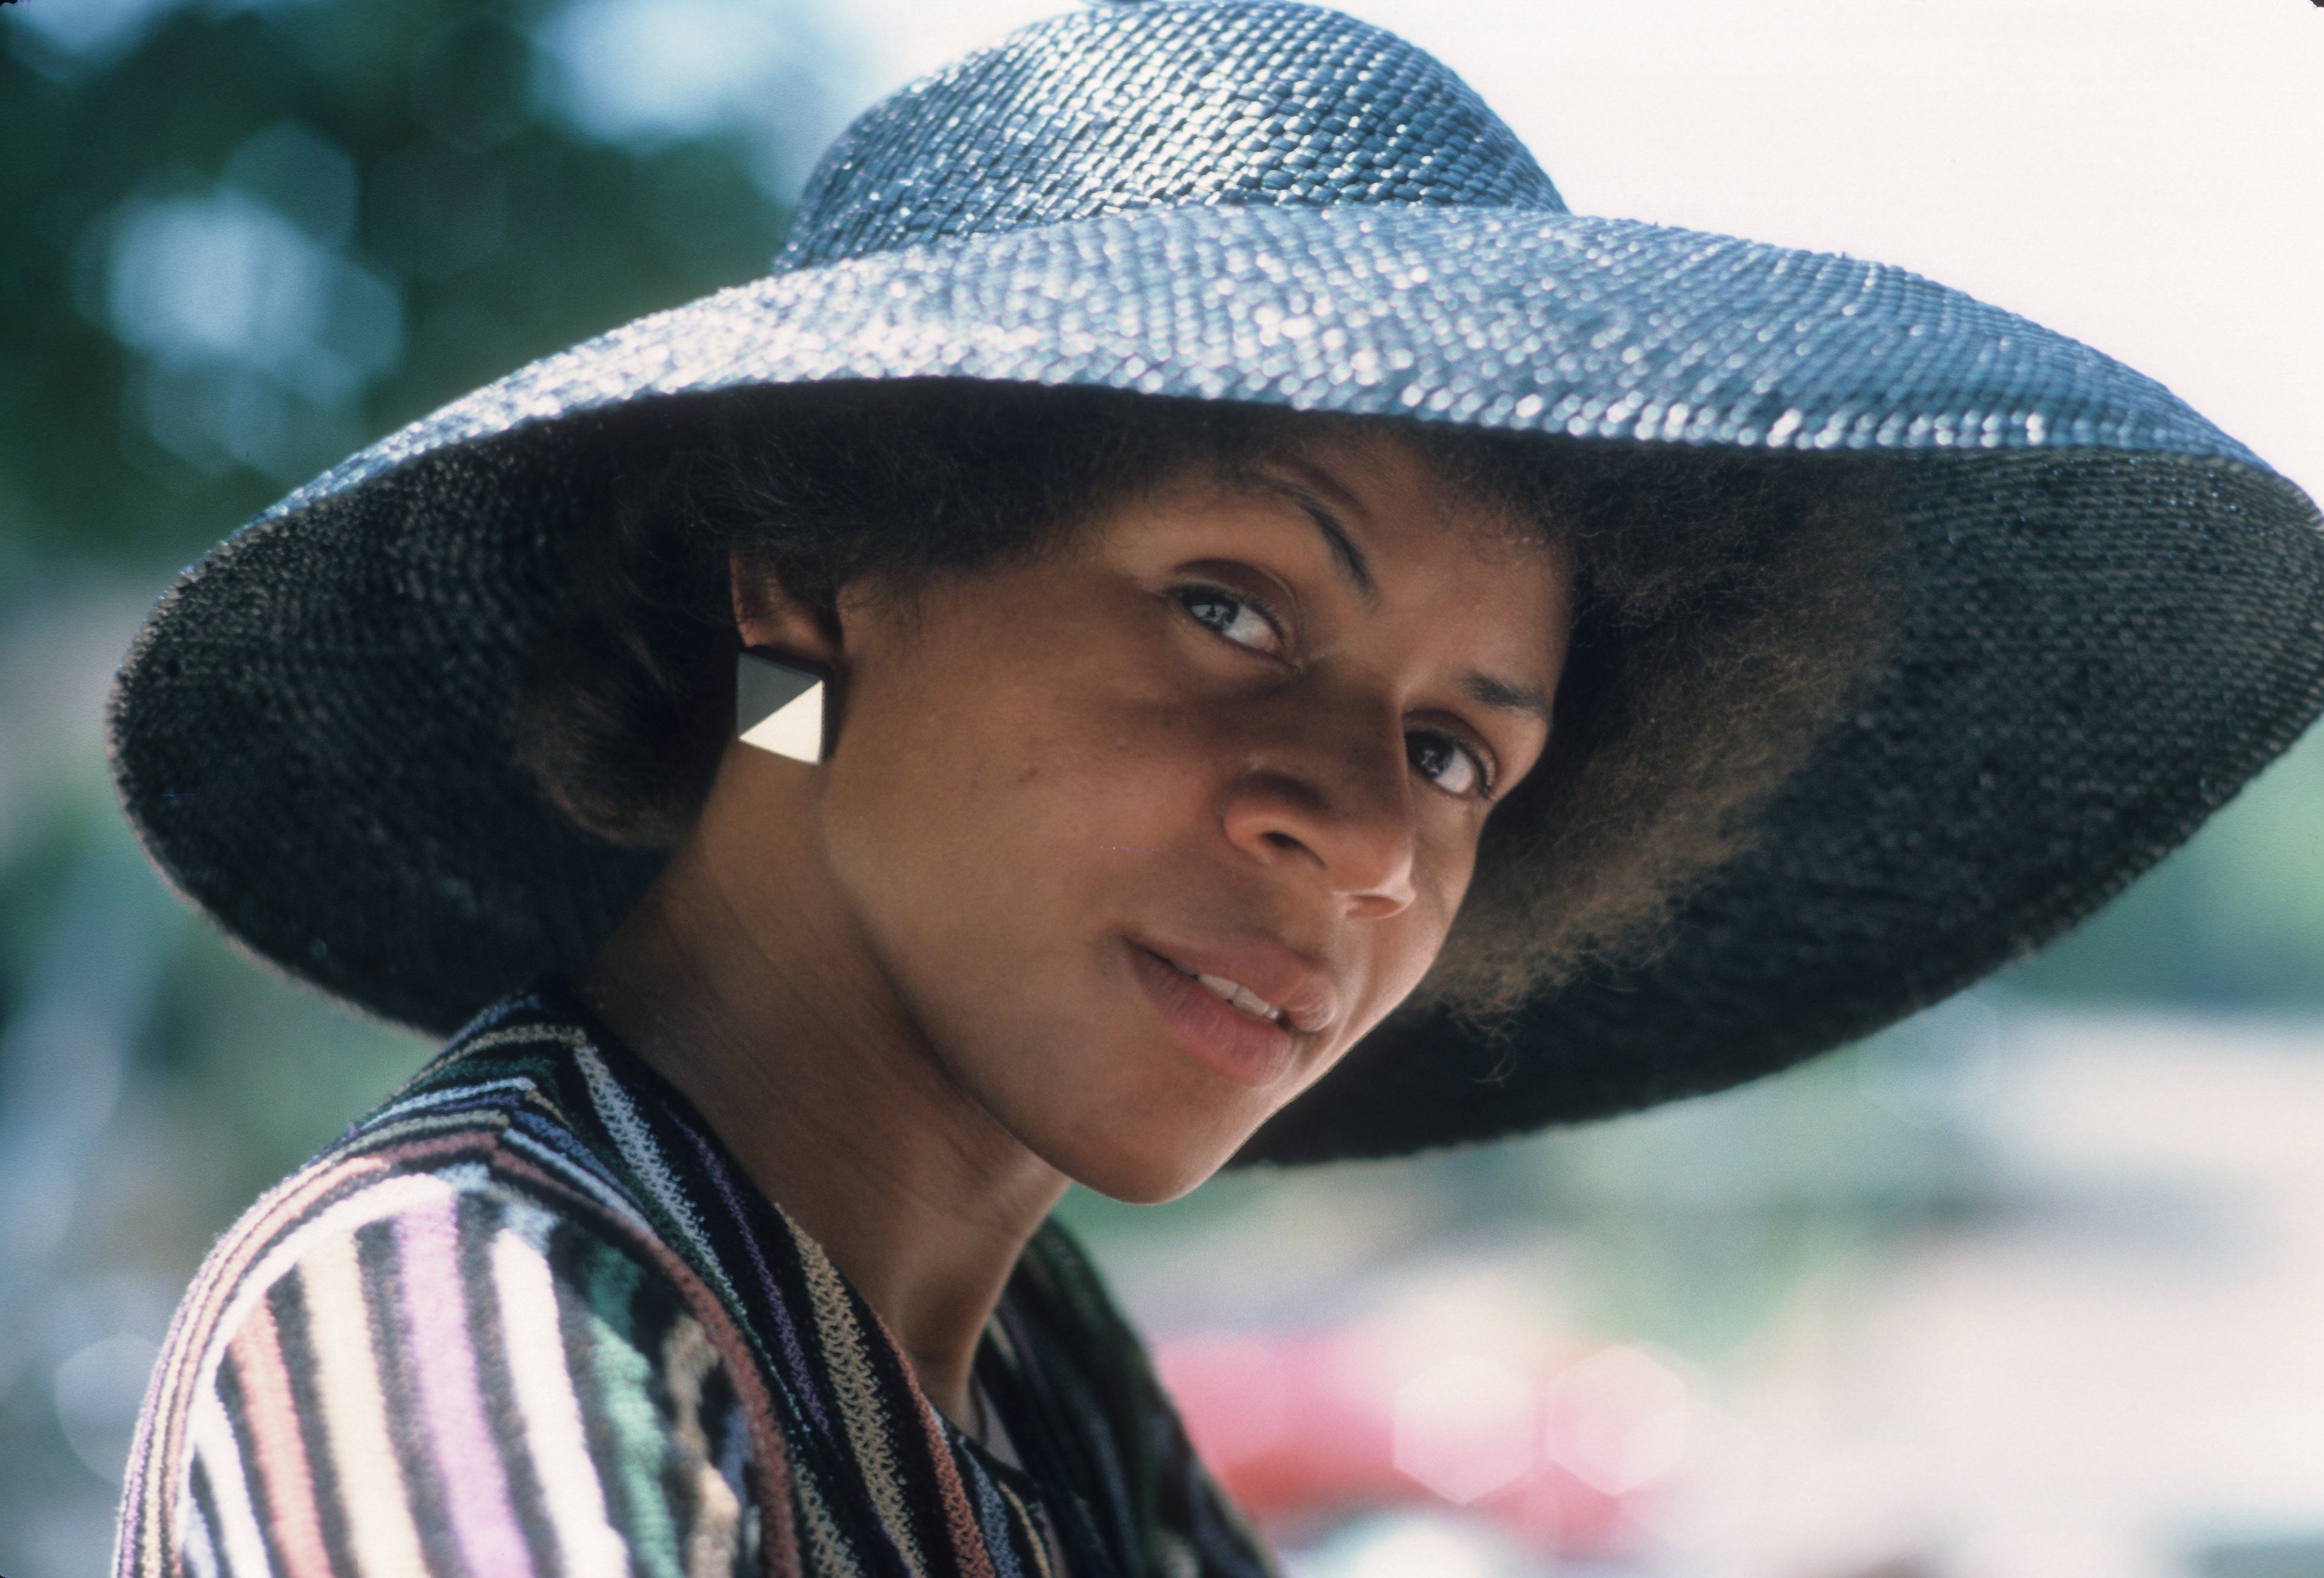 Minnie Riperton poses for a portrait in August 1975 in Los Angeles, Califor...